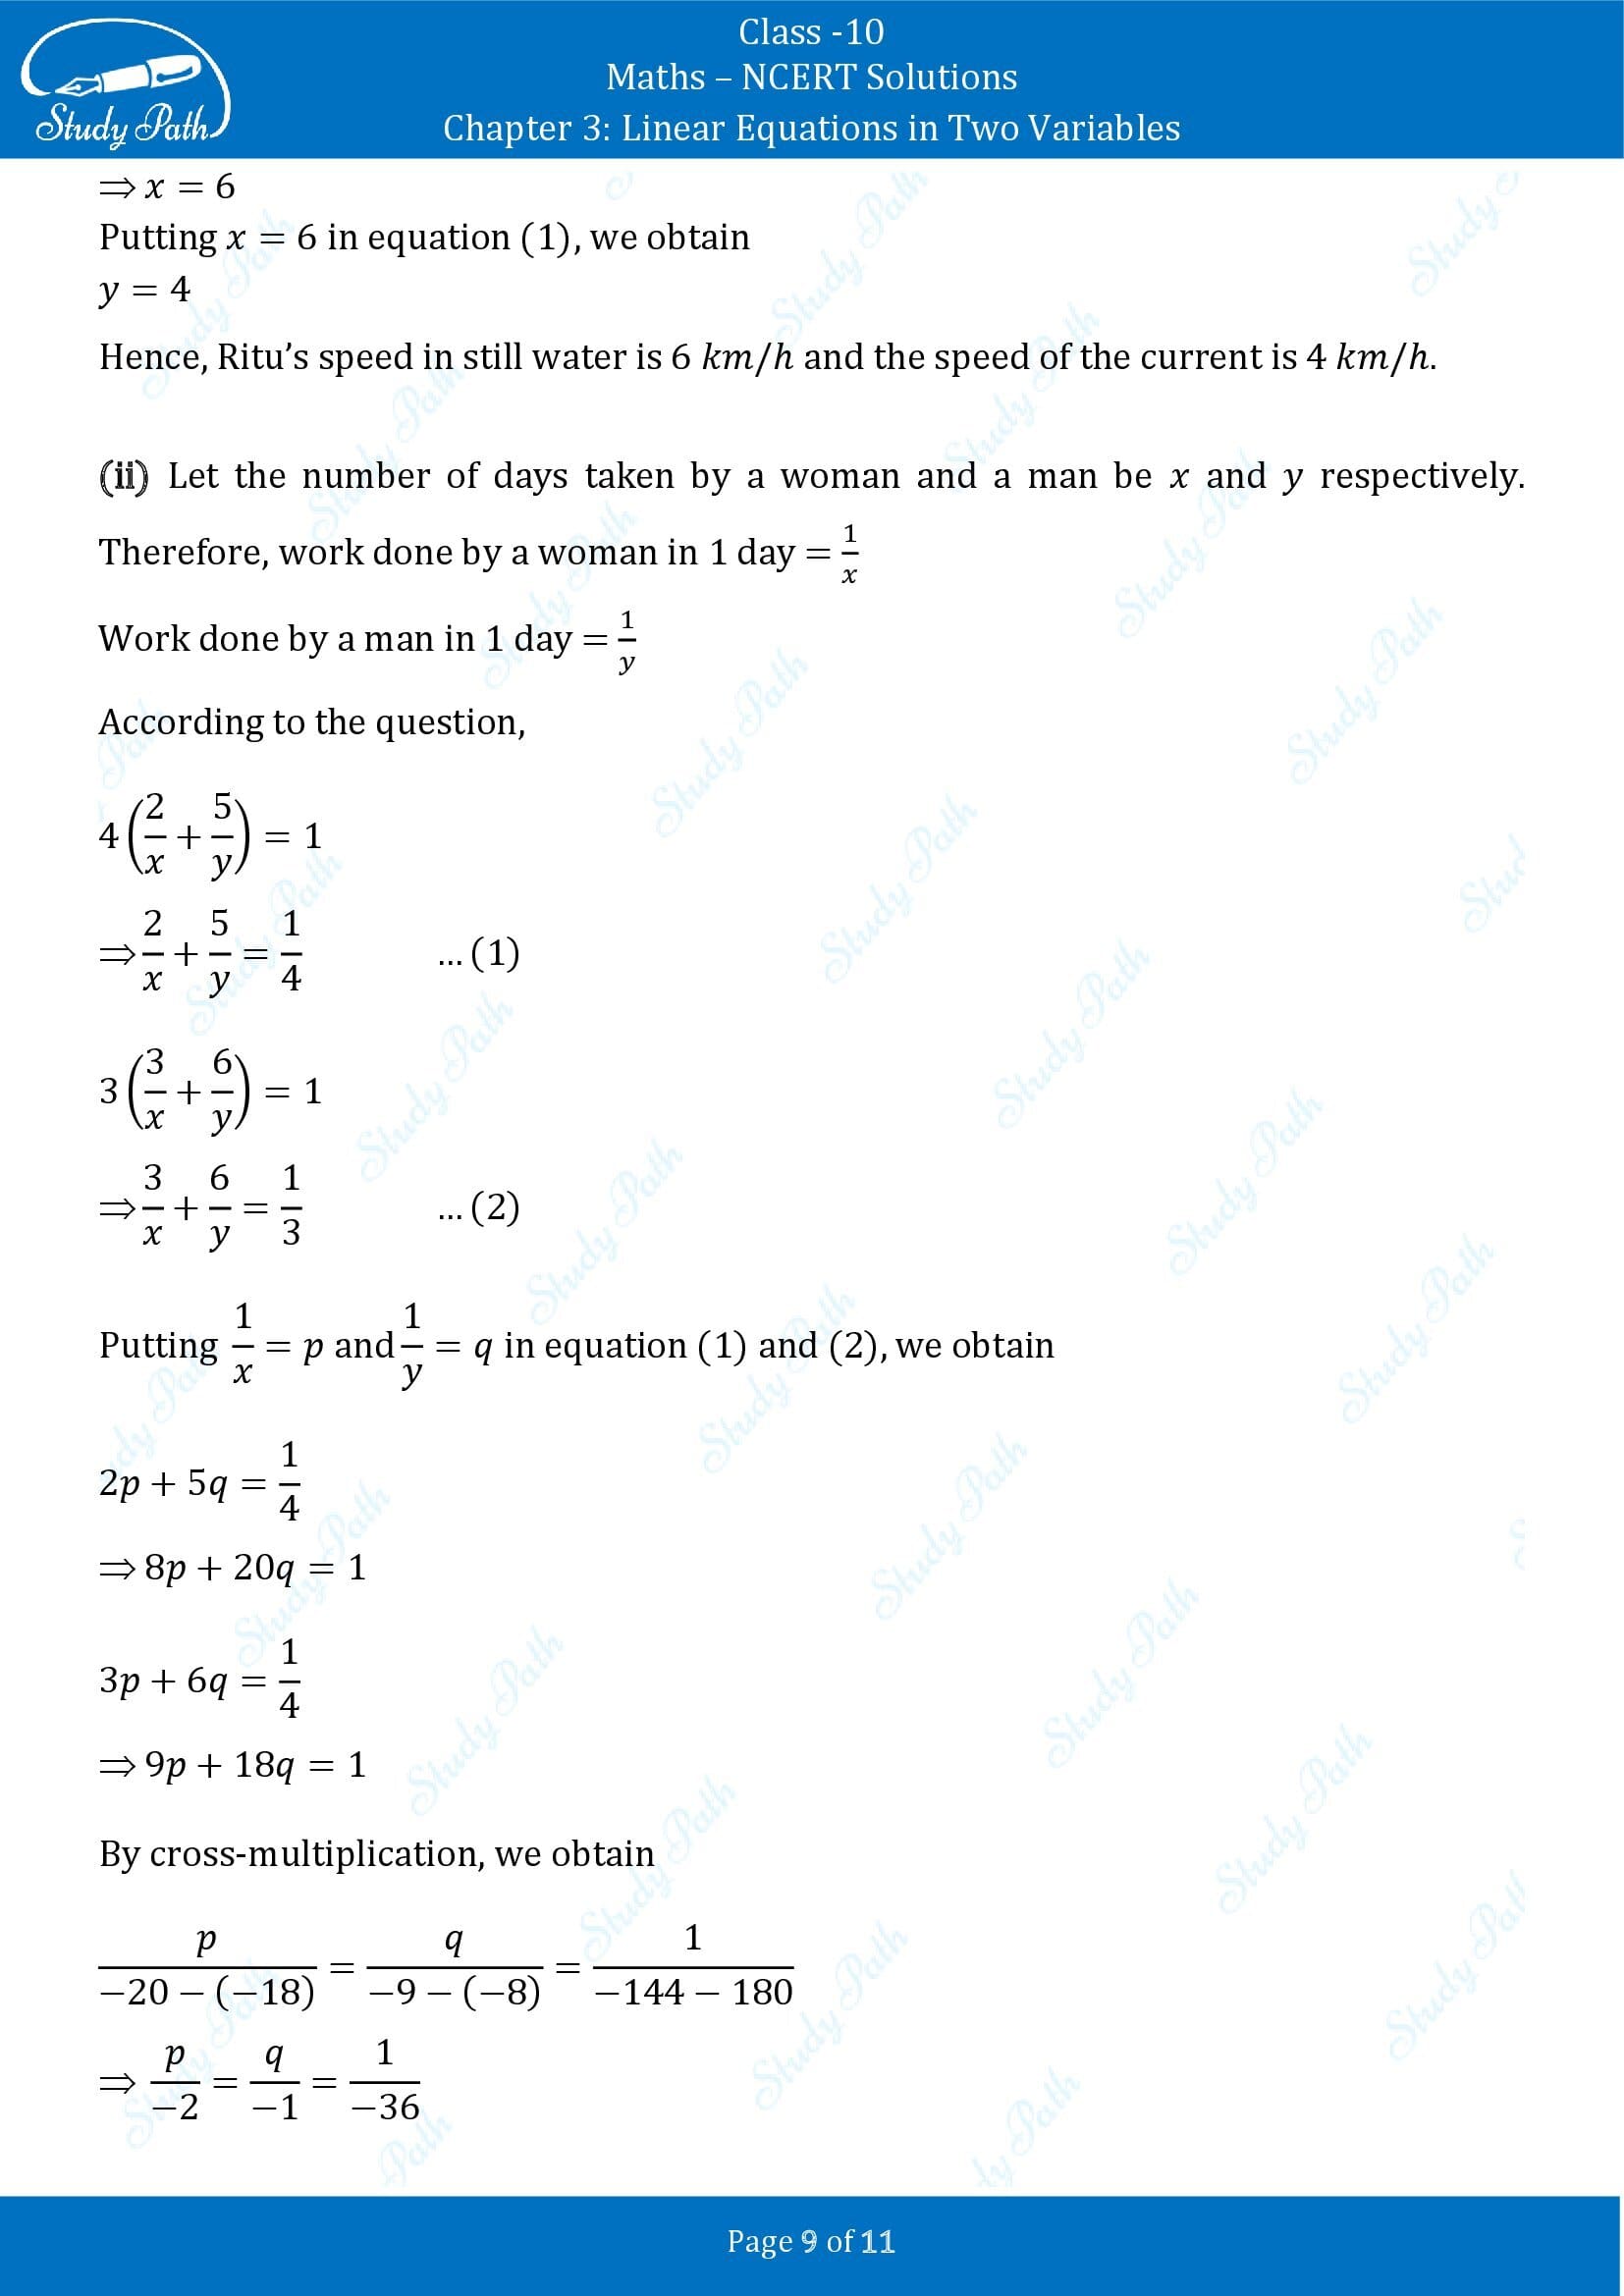 NCERT Solutions for Class 10 Maths Chapter 3 Linear Equations in Two Variables Exercise 3.6 00009